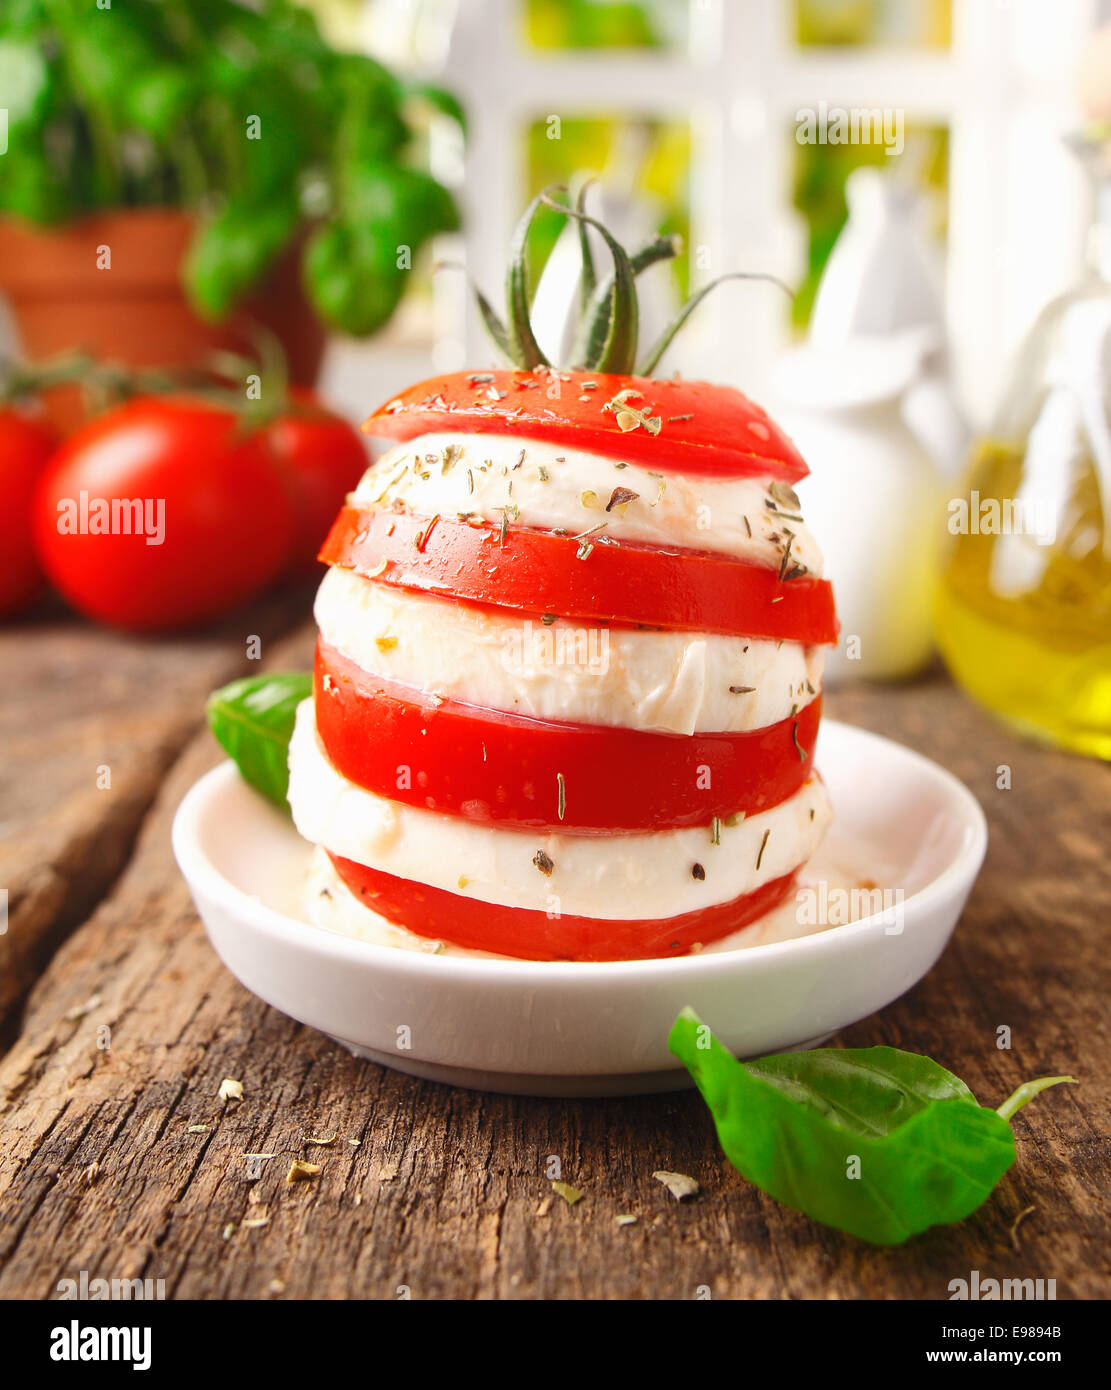 Preparing an individual gourmet cheese and tomato salad with a tower formed of alterning slices standing on a rustic wooden kitchen table Stock Photo